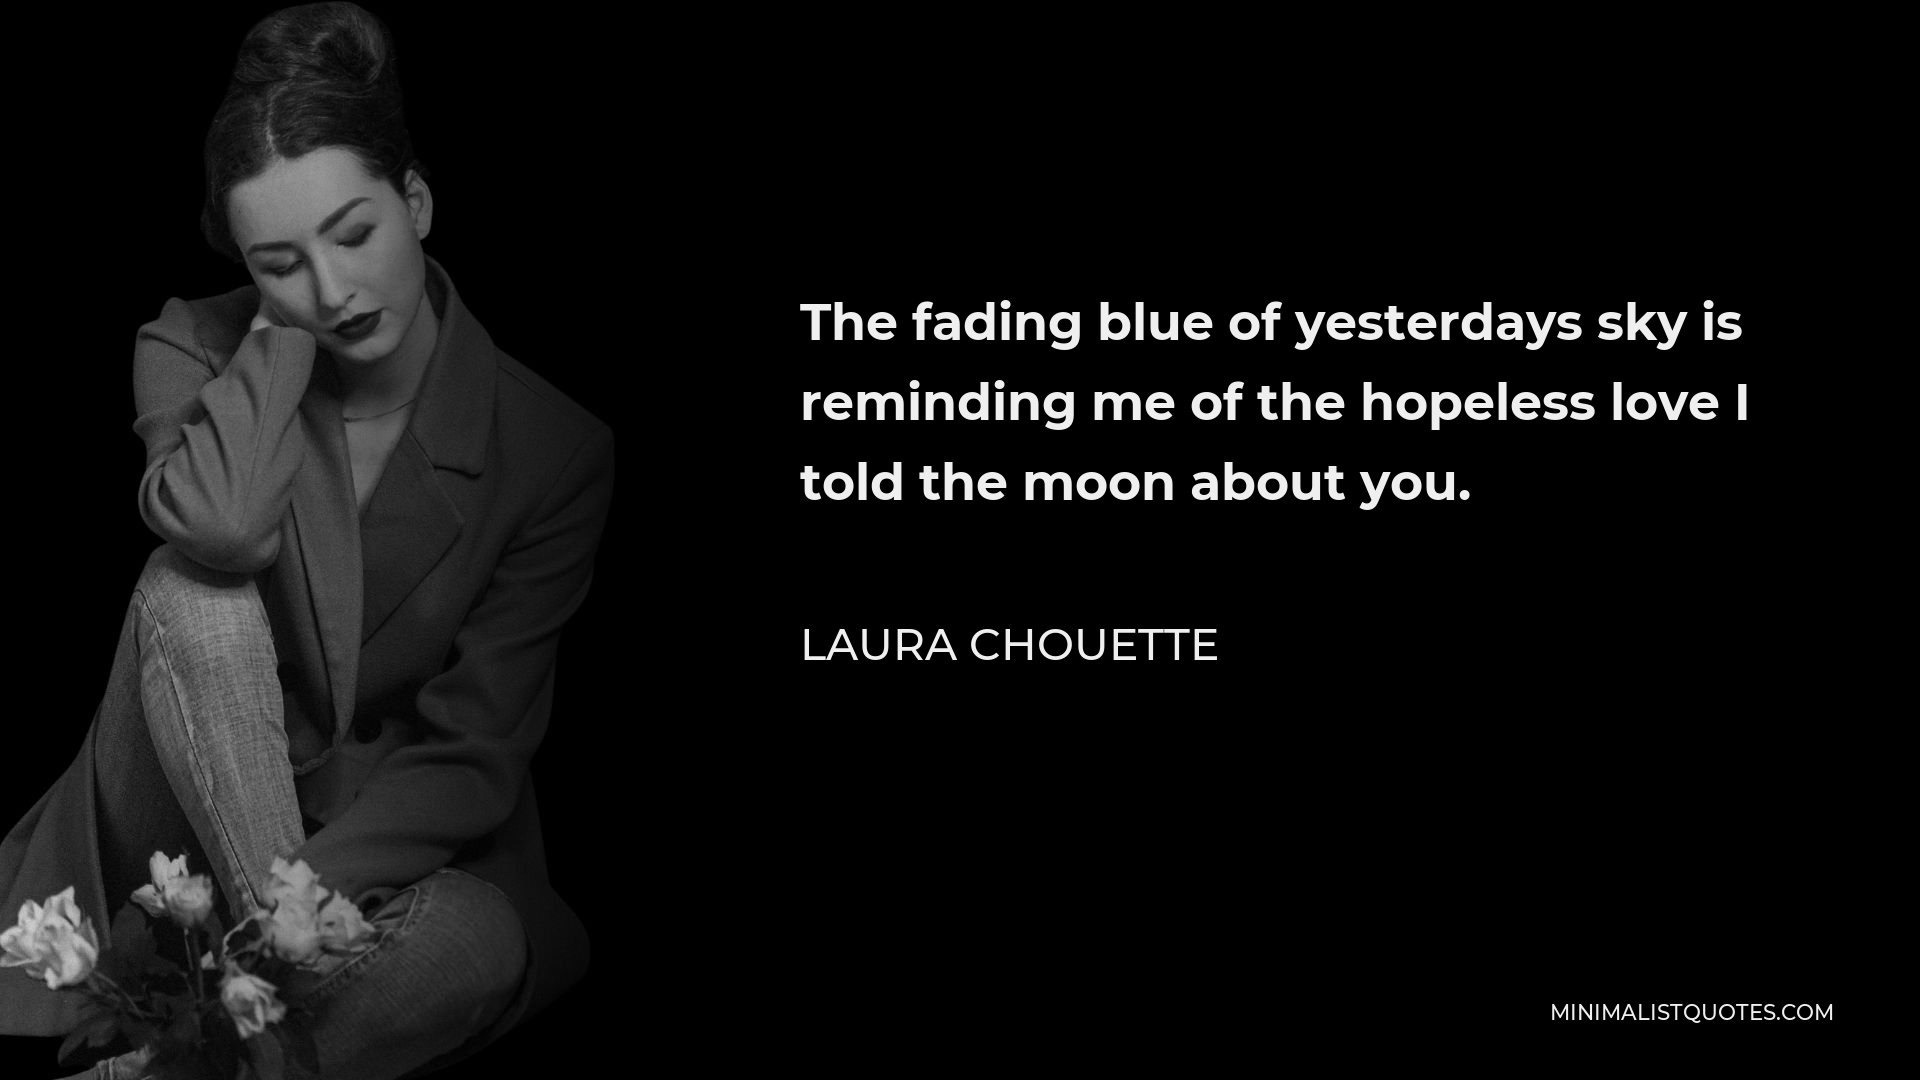 Laura Chouette Quote - The fading blue of yesterdays sky is reminding me of the hopeless love I told the moon about you.